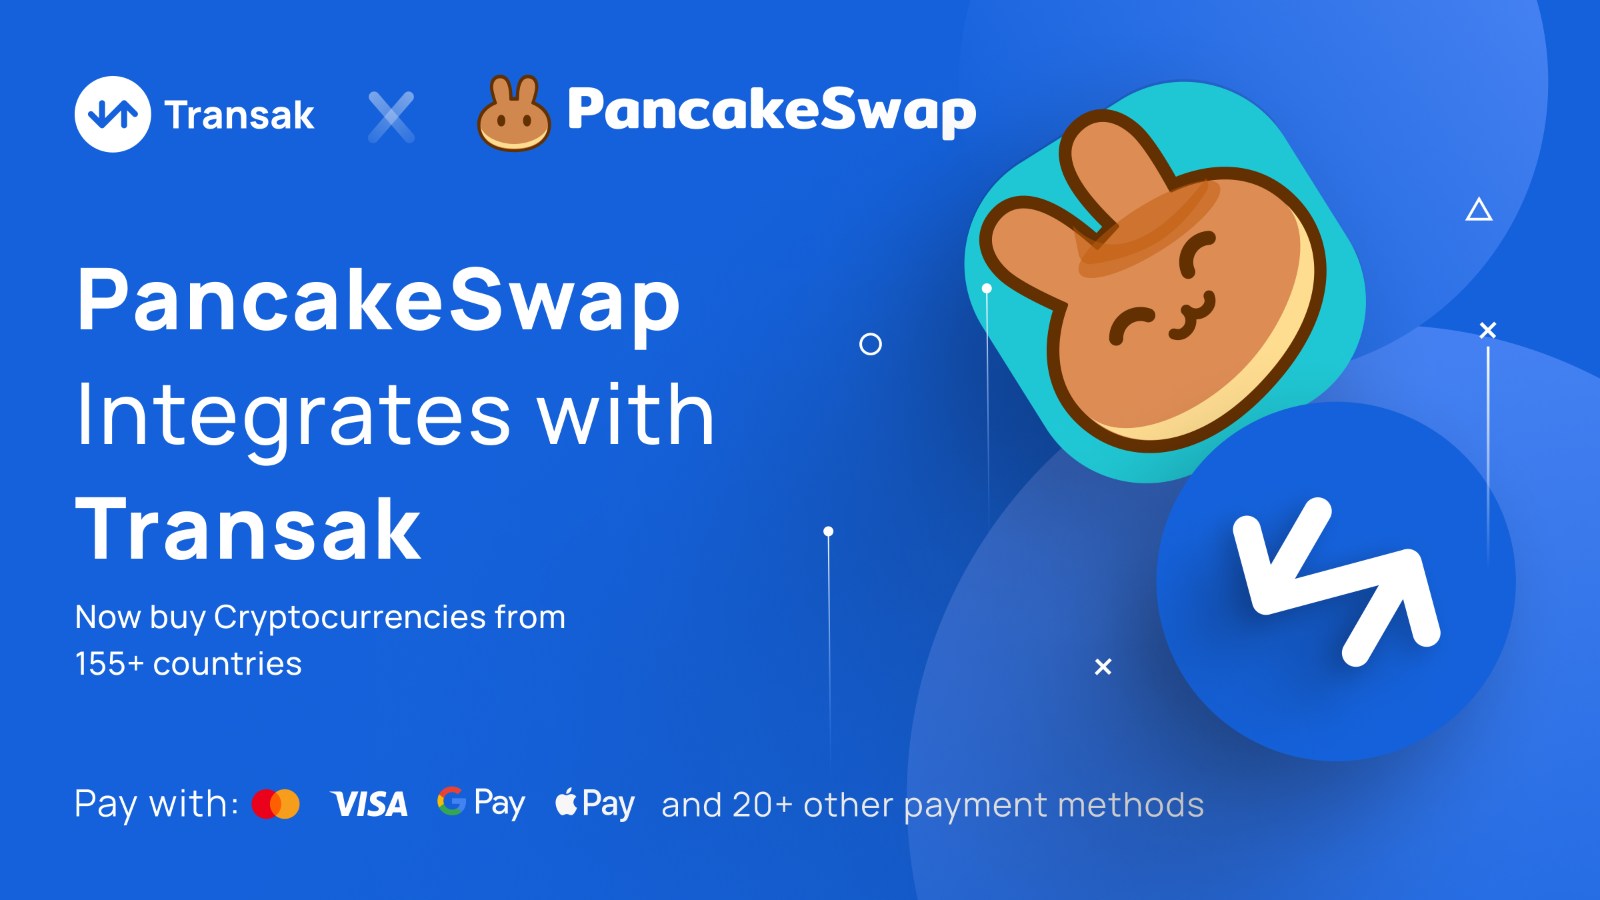 Transak announced its integration on PancakeSwap, one of the largest decentralized exchanges in the world, with over 2.8 million users.